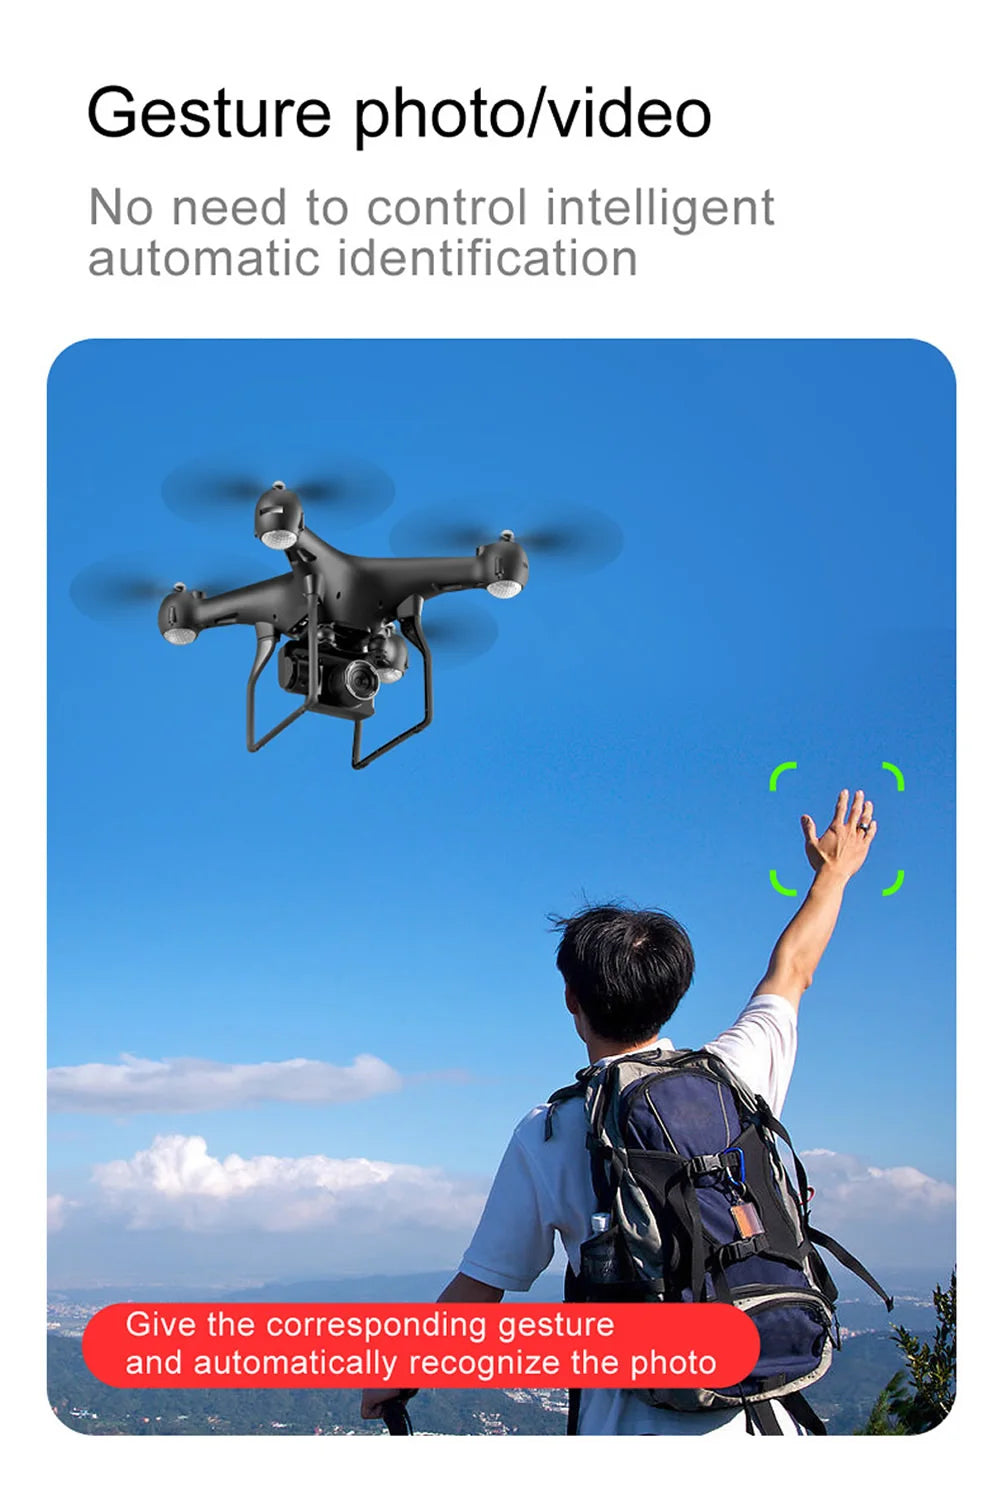 New Remote Control Drone, gesture photolvideo no need to control intelligent automatic identification give the 